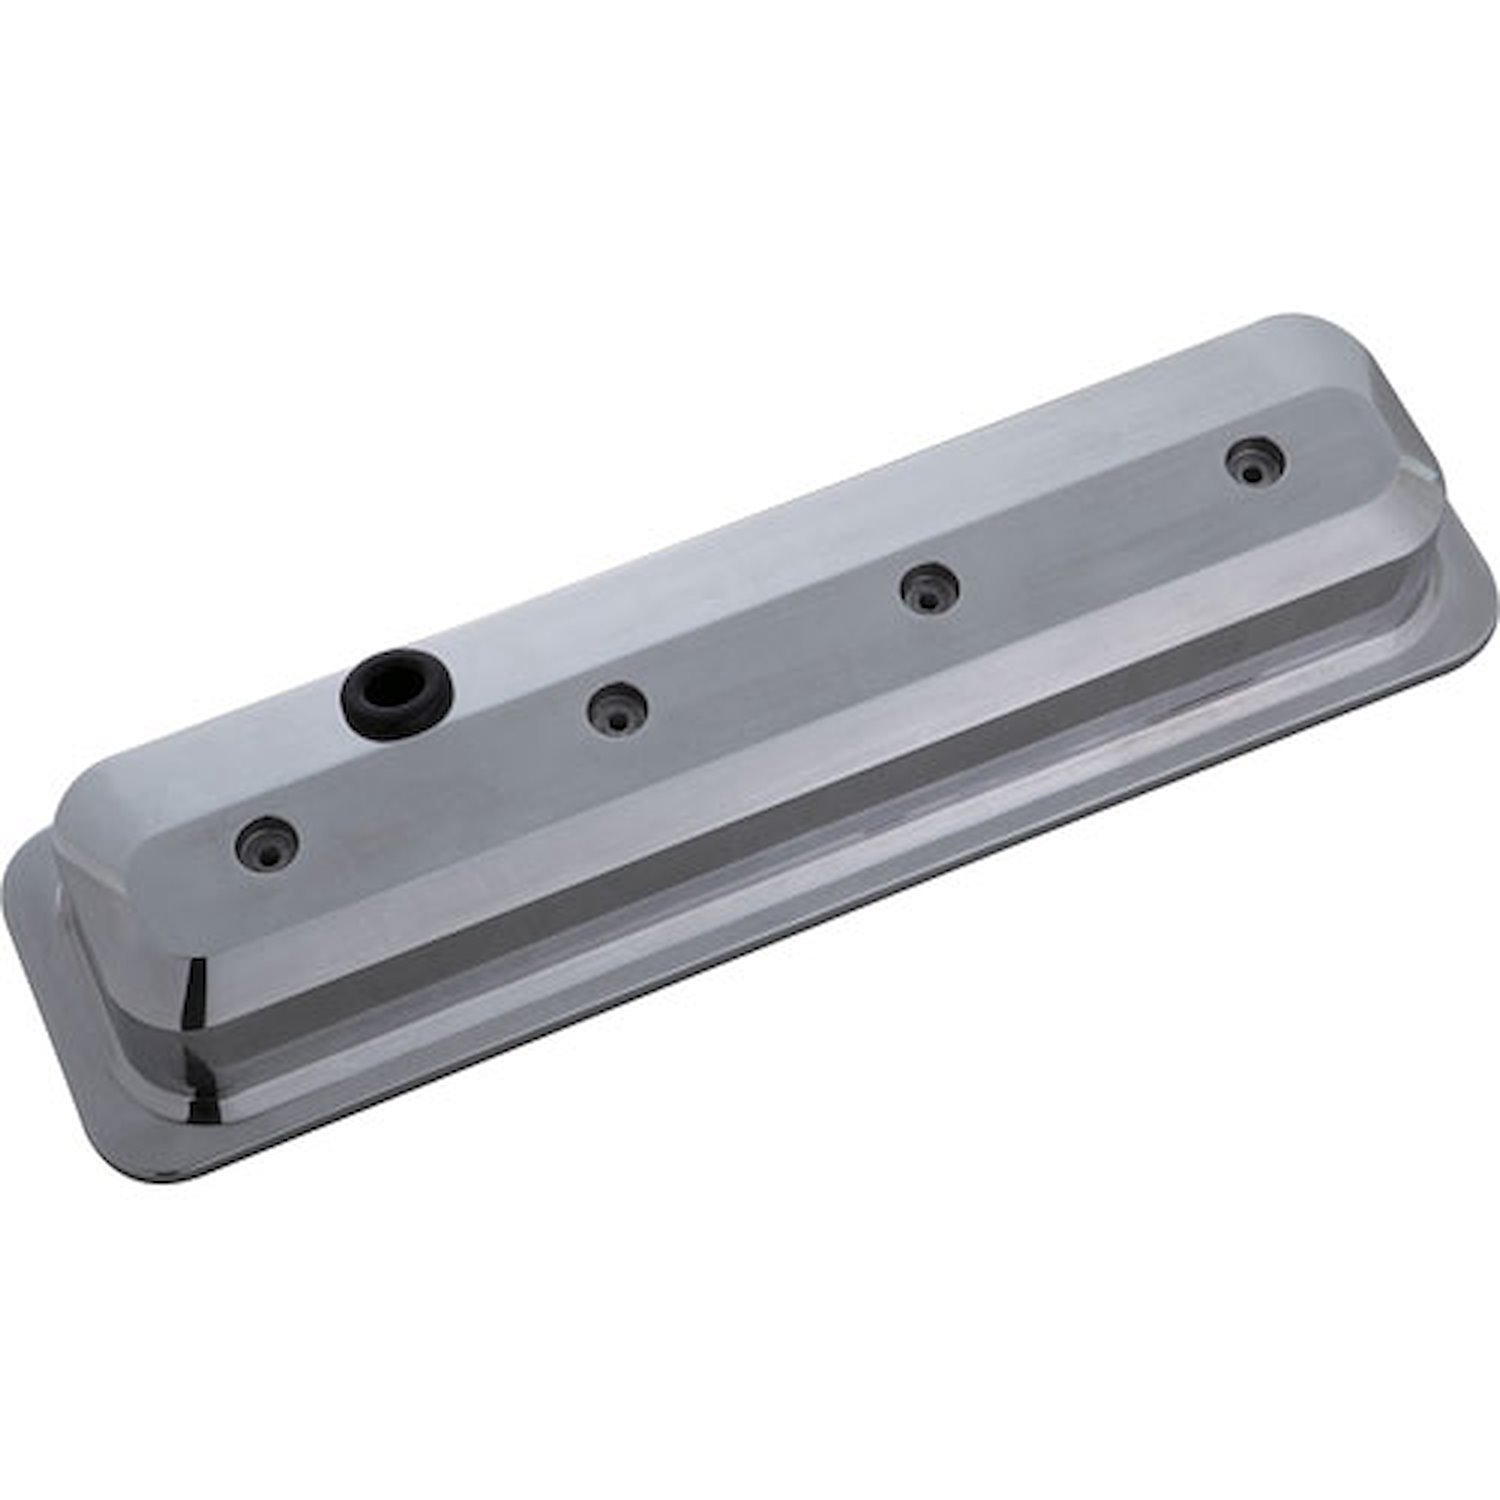 Die-Cast Slant-Edge Valve Covers for 1987-Up Small Block